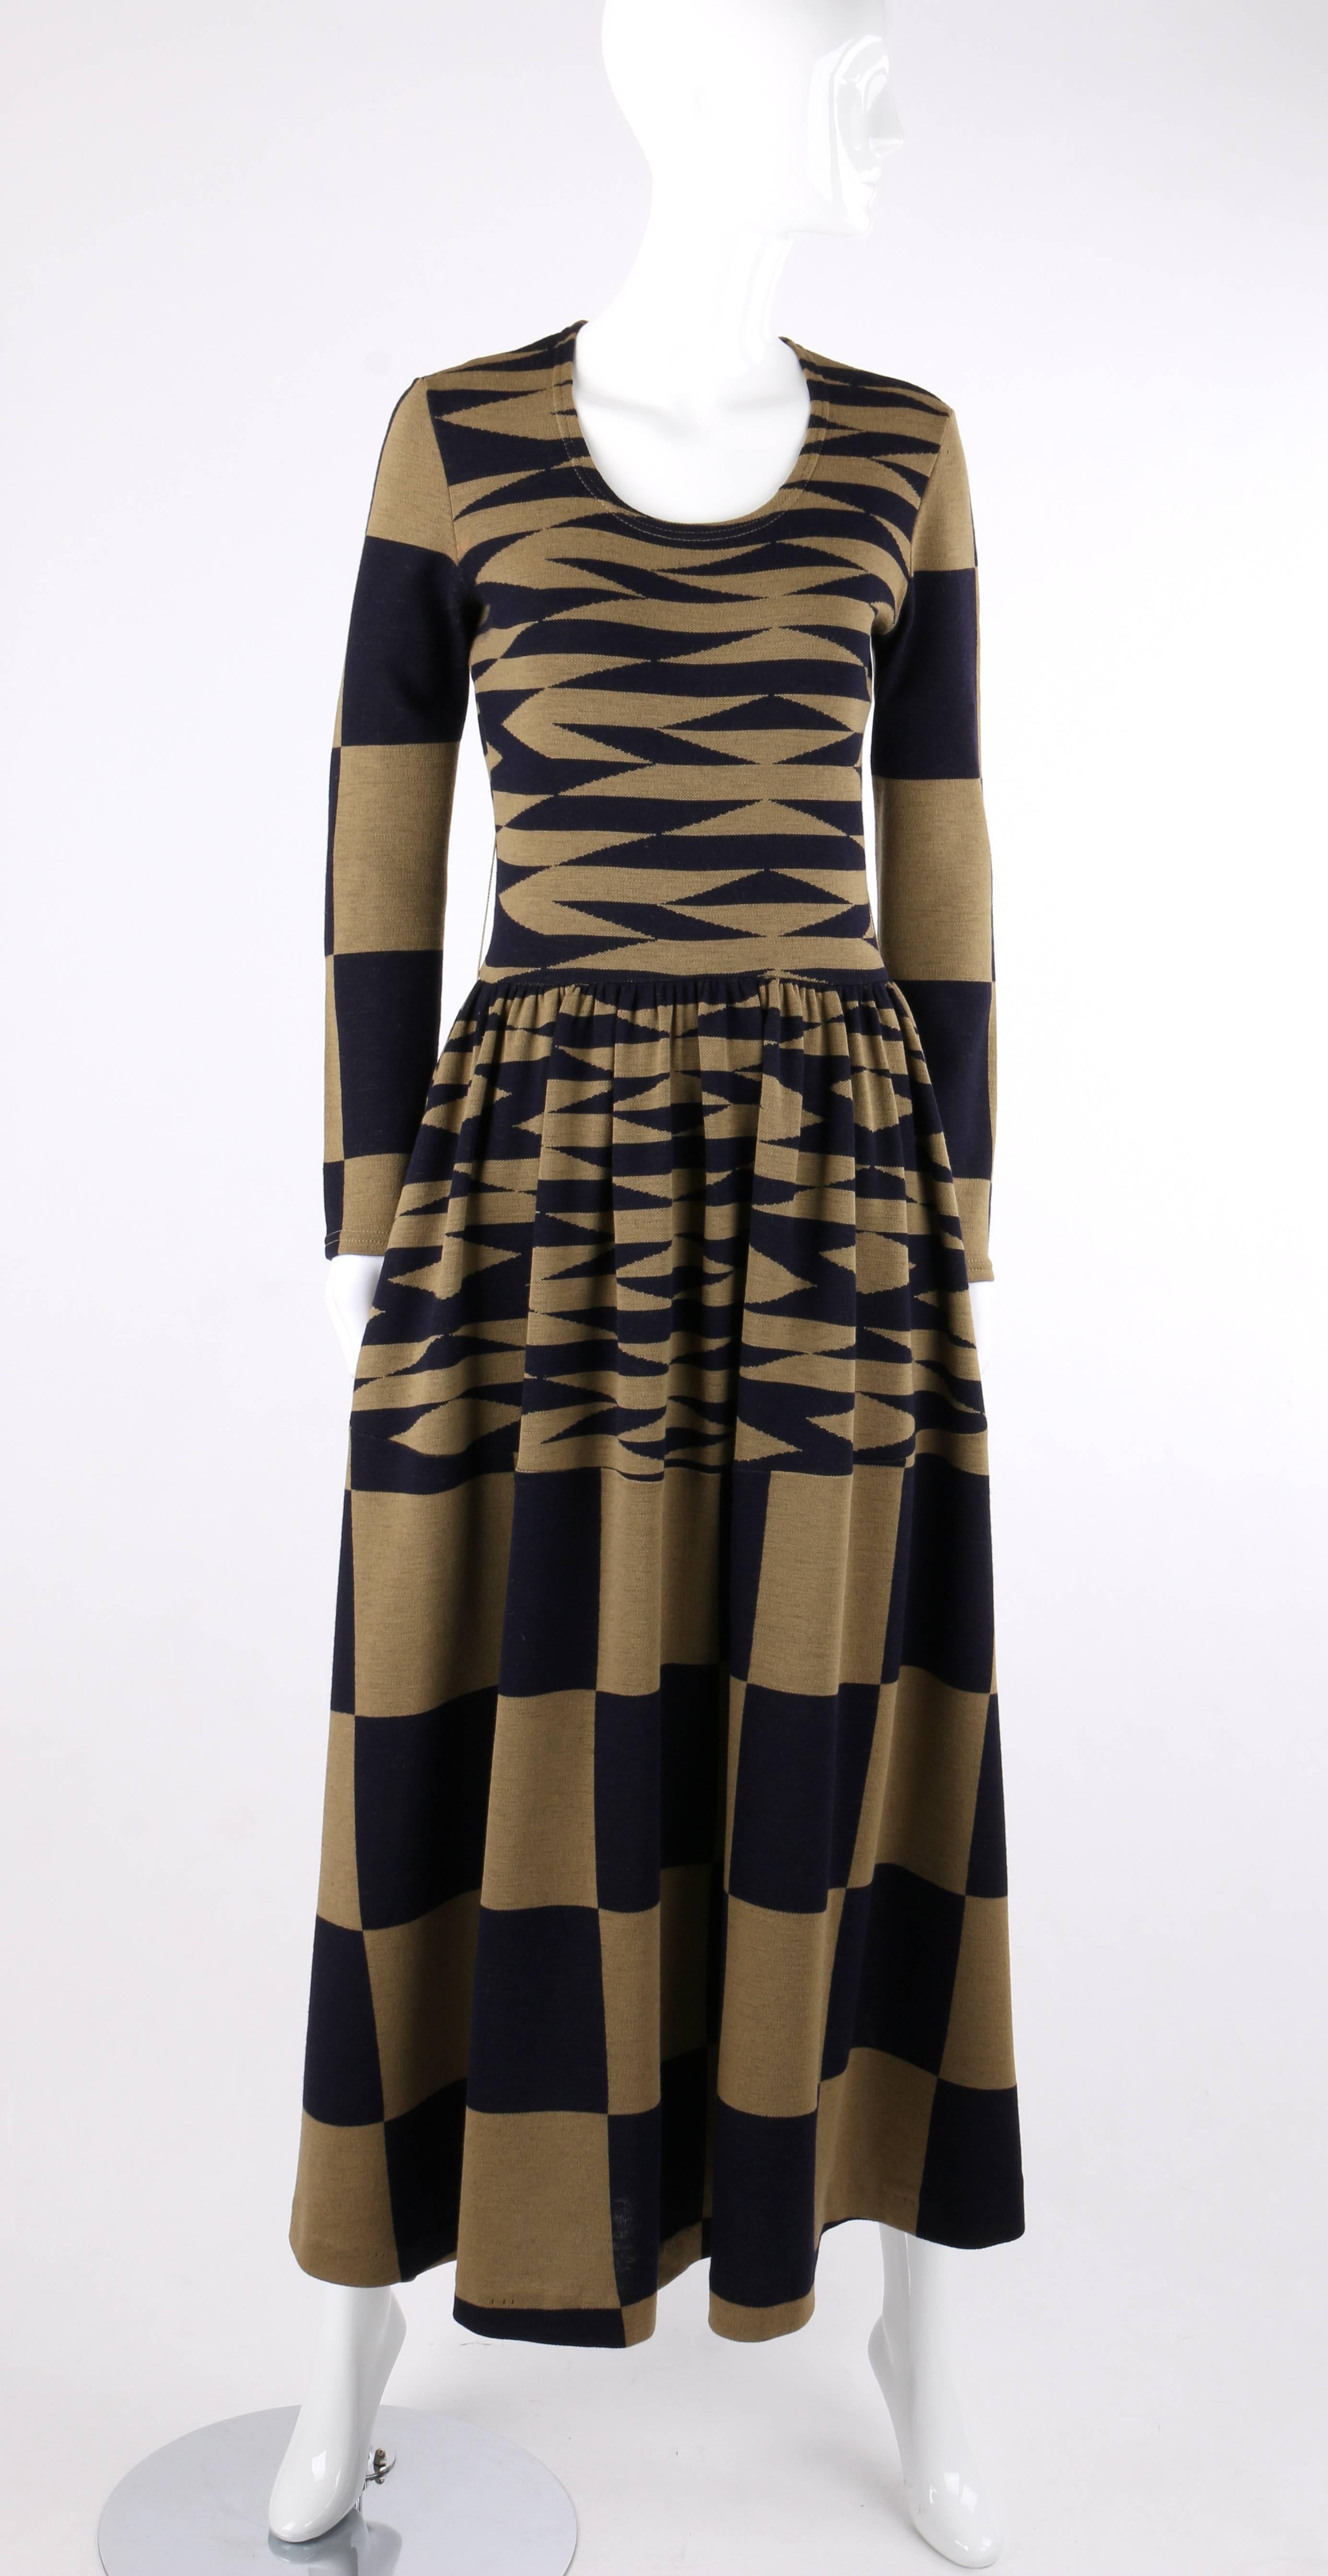 Vintage Rudi Gernreich Design for Harmon Knitwear c.1971 op art check pattern wool knit mod maxi dress. As seen modeled by Peggy Moffitt in 1971. Navy blue and olive brown op art and checkered pattern knit. Deep scoop neckline. Long sleeves. Two